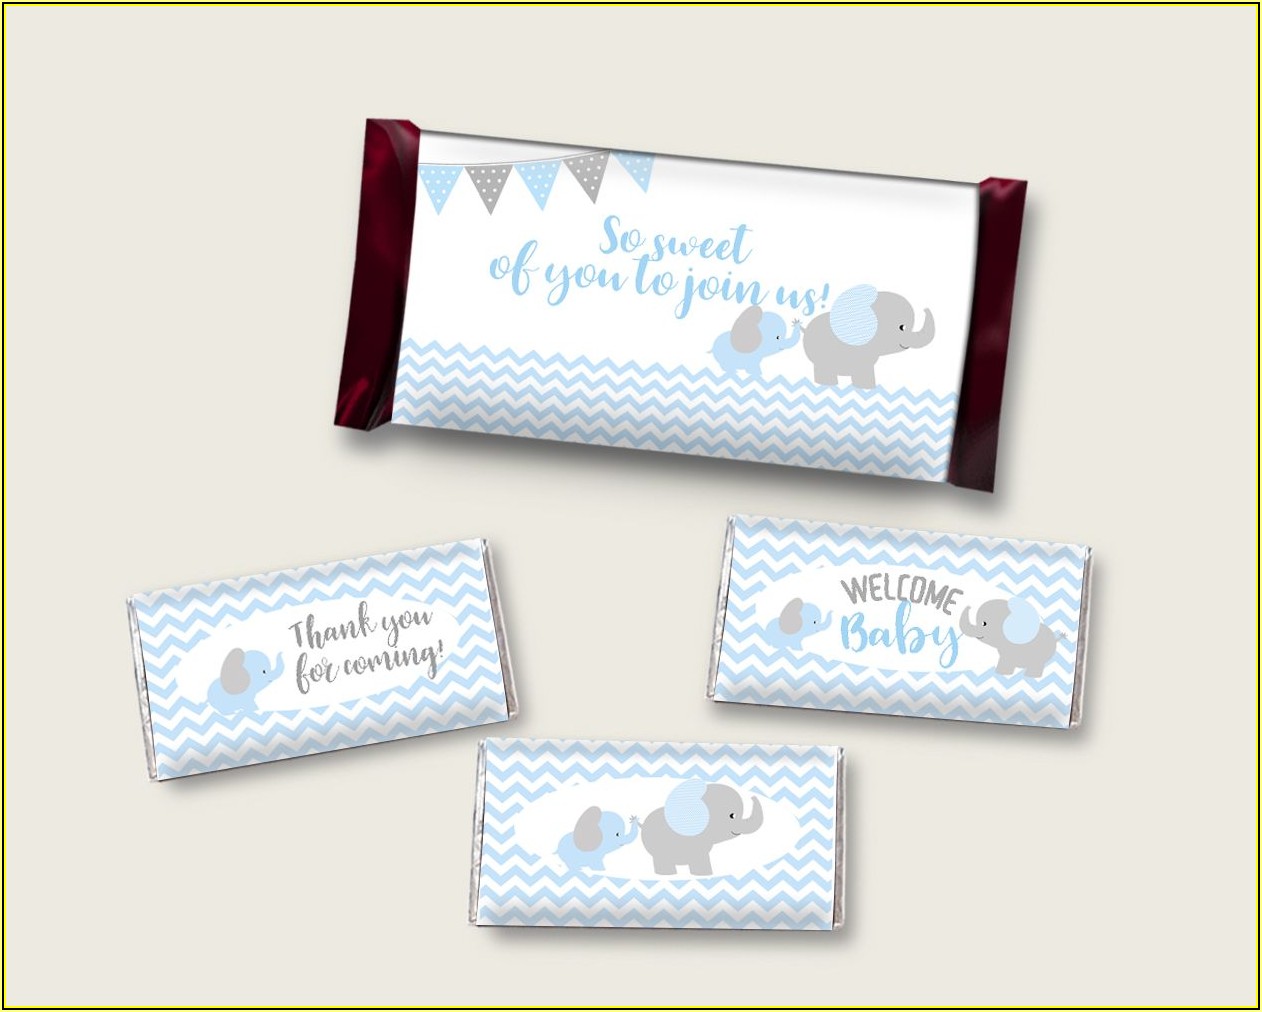 Hershey Candy Bar Wrapper Template Baby Shower